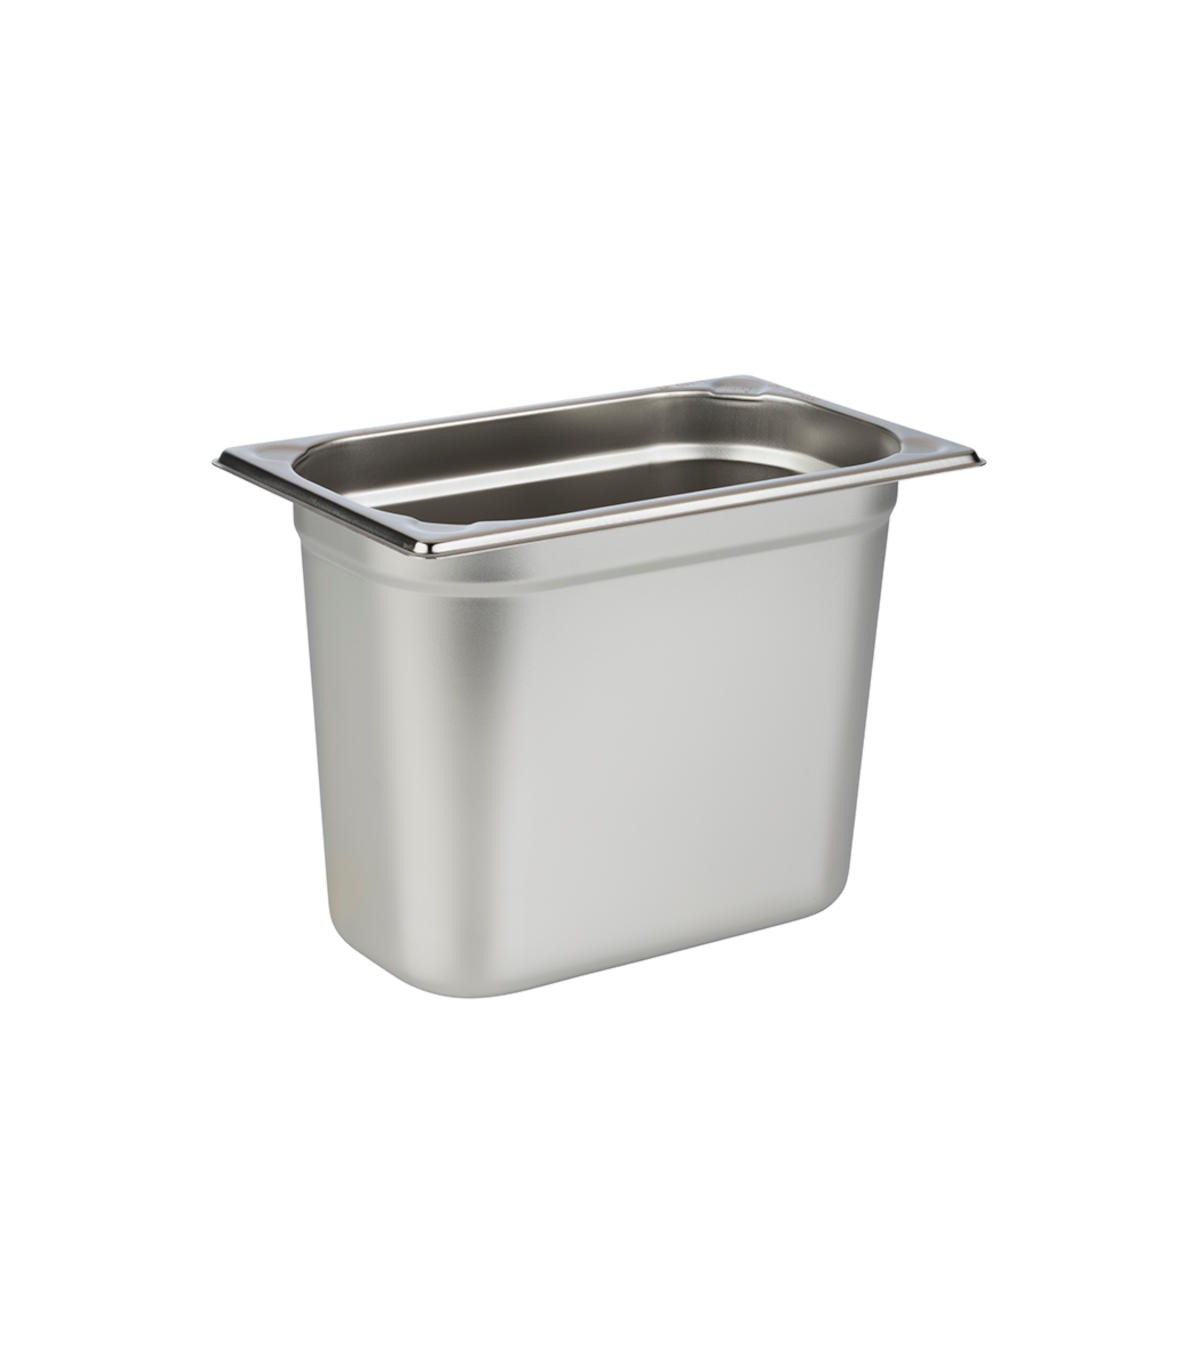 STAINLESS STEEL CONTAINER GN1/4 - Cool - The Insulated Box.Com